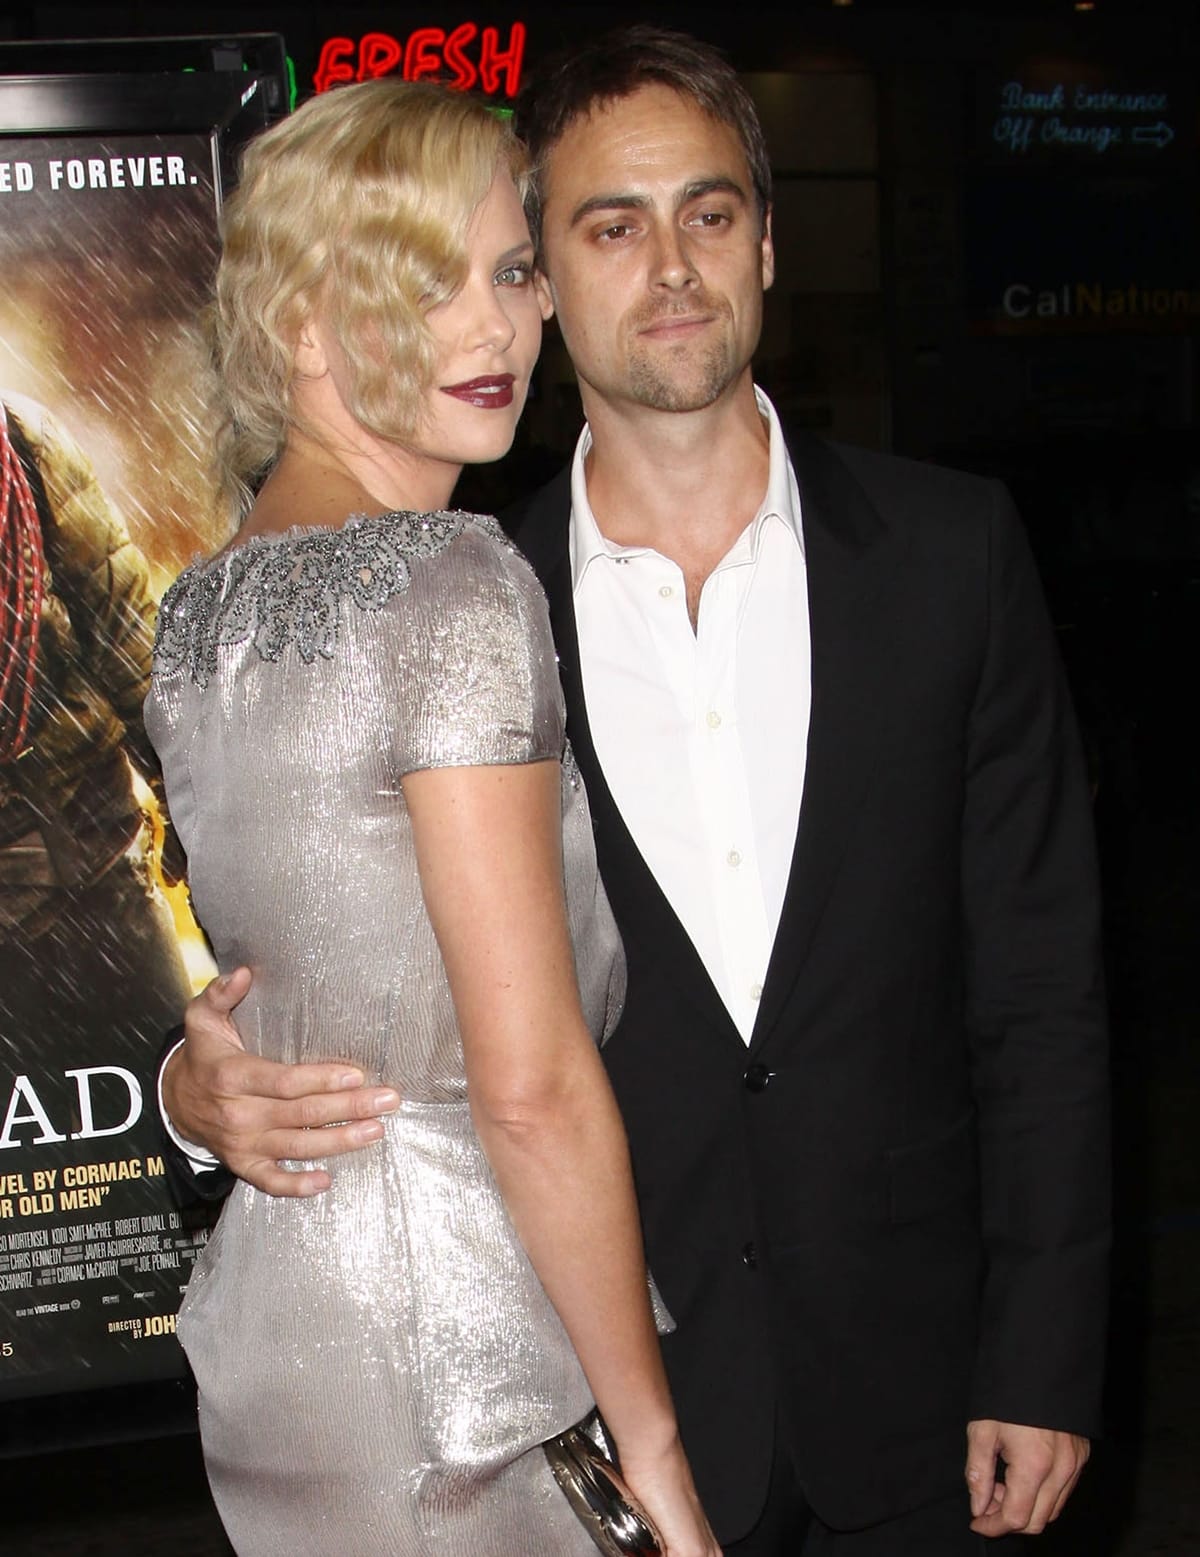 Charlize Theron is three years younger and one inch shorter than Stuart Townsend